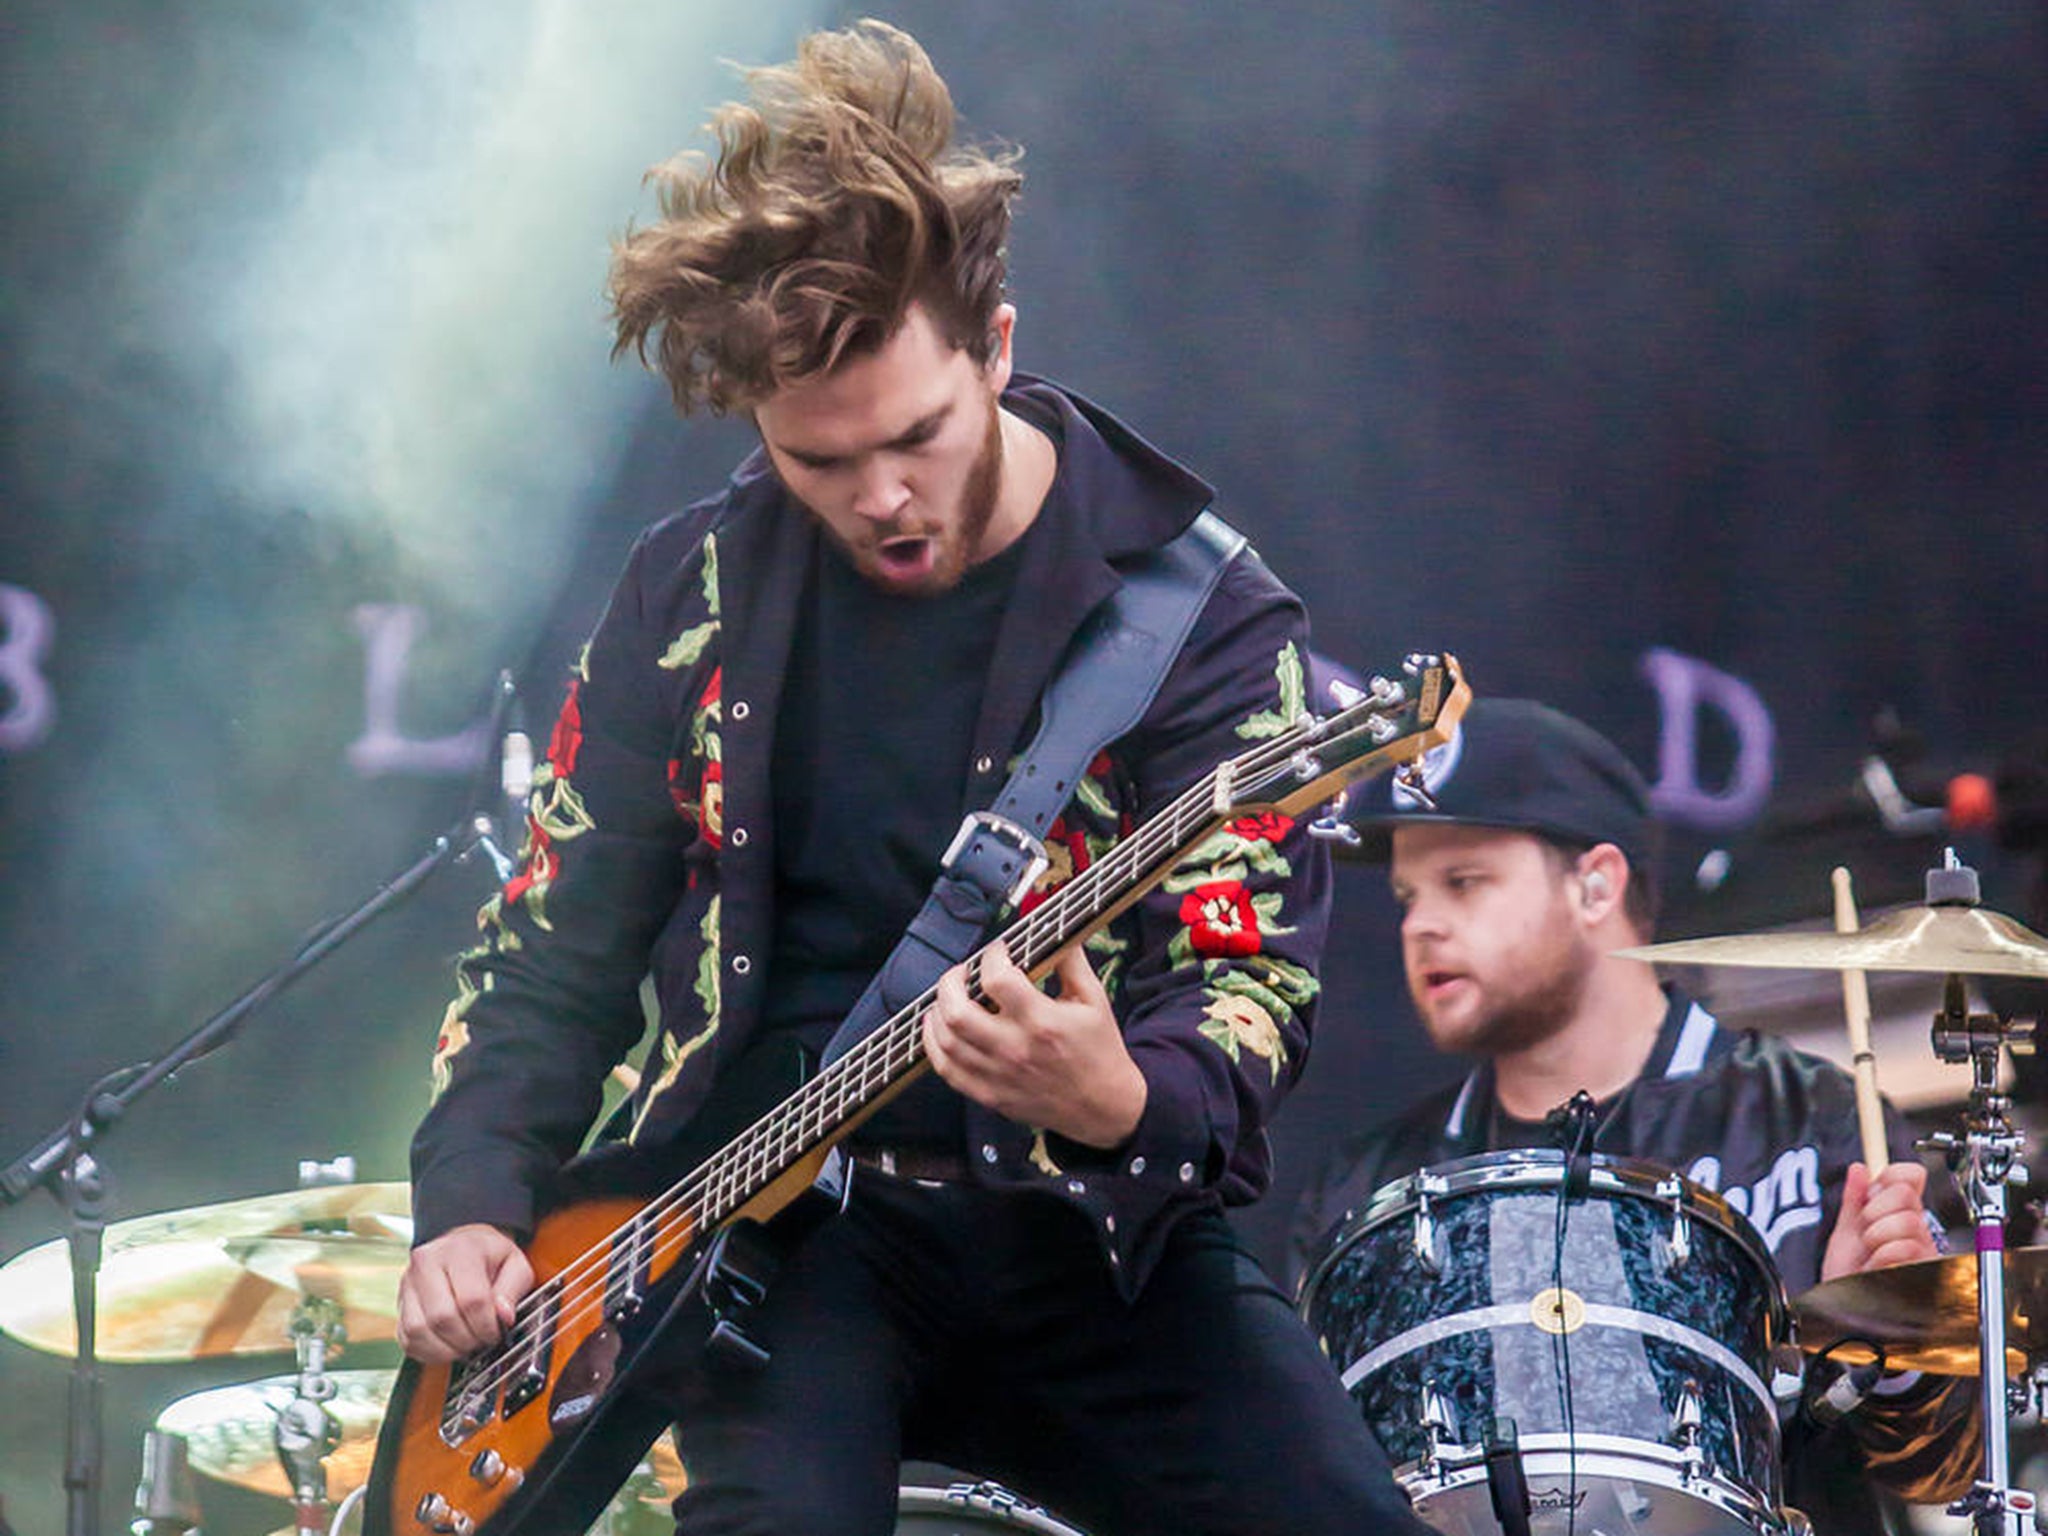 Royal Blood impressed on the main stage